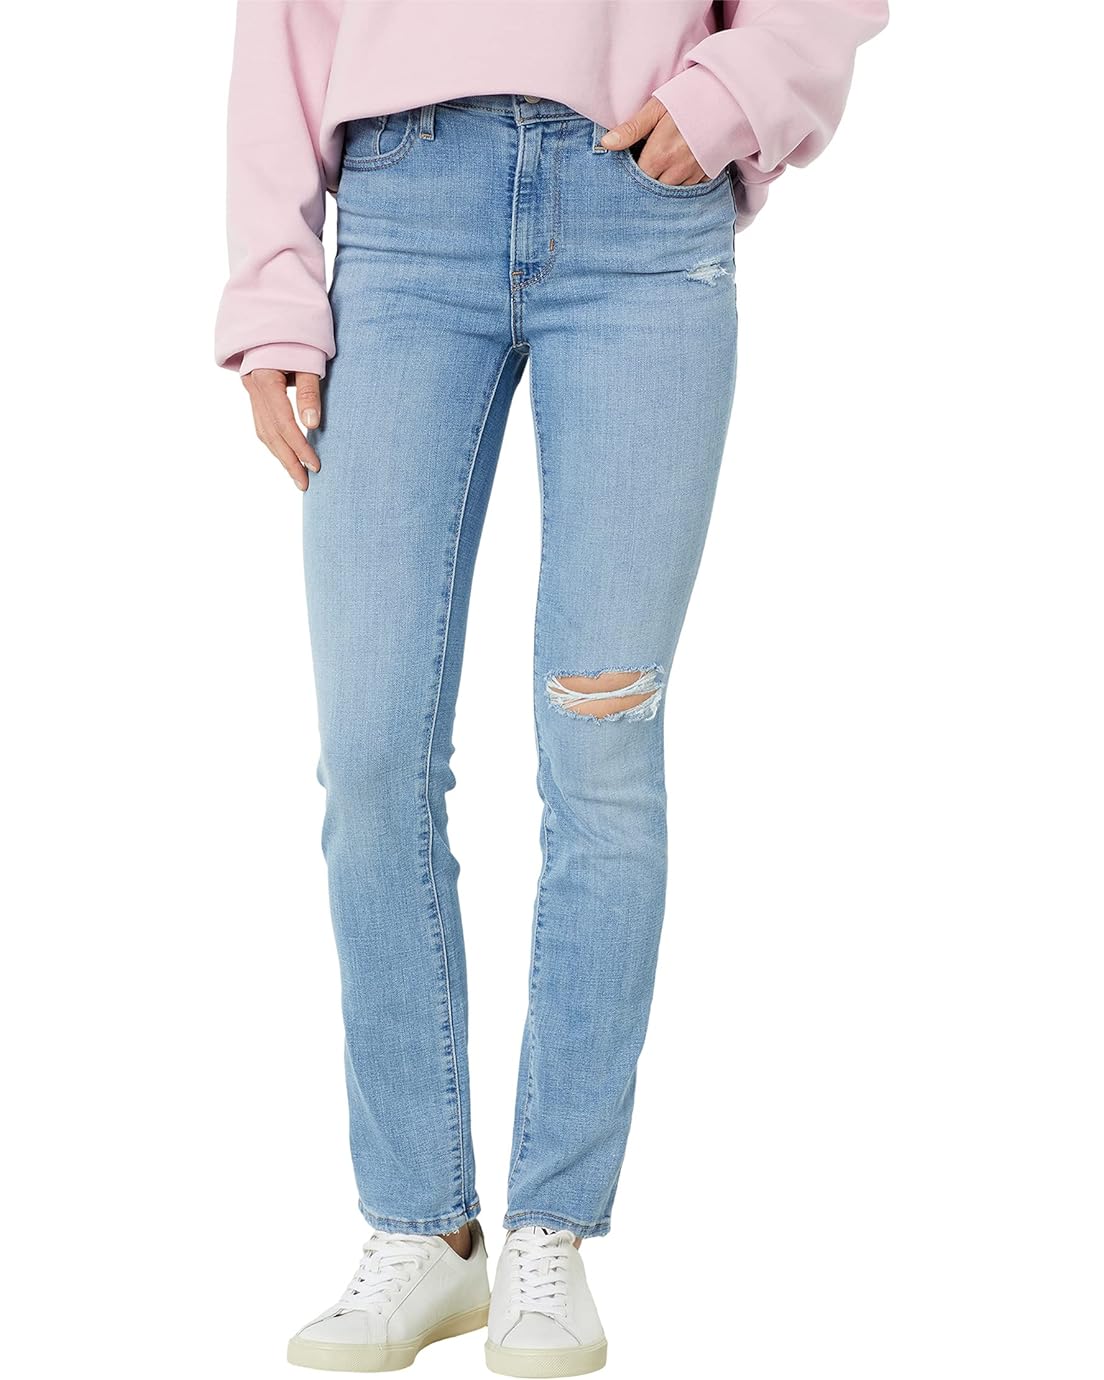 Levis Womens 724 High-Rise Straight